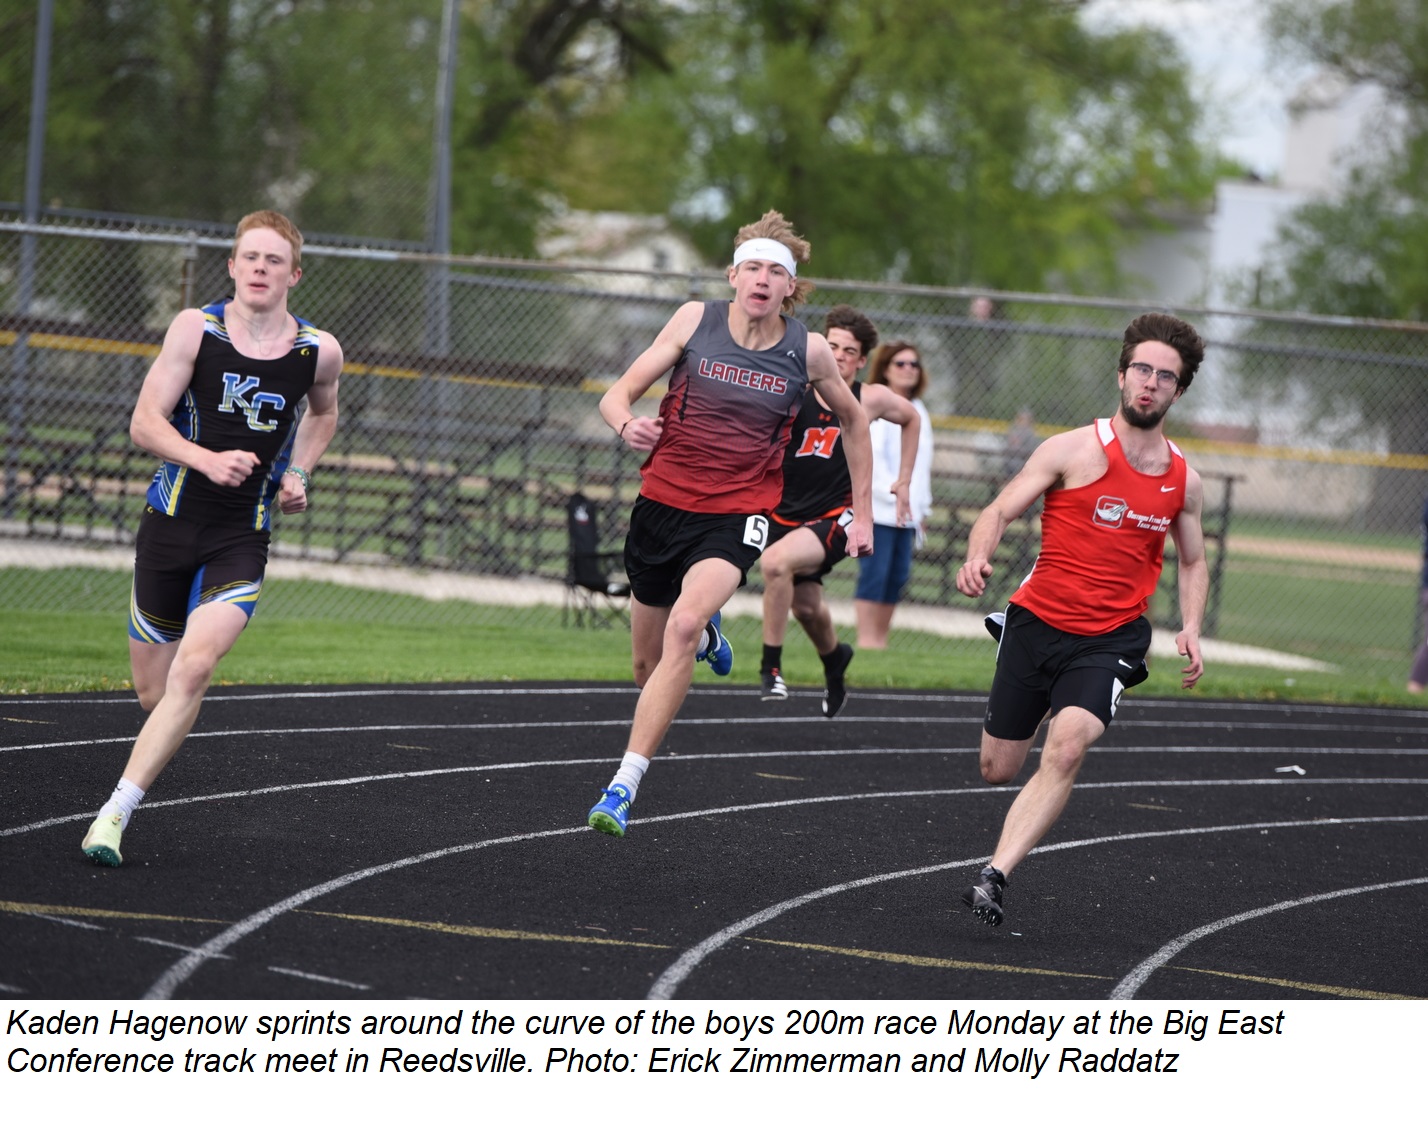 Kaden Hagenow sprints around the 200m curve during the Big East Conference track meet Monday in Reedsville.